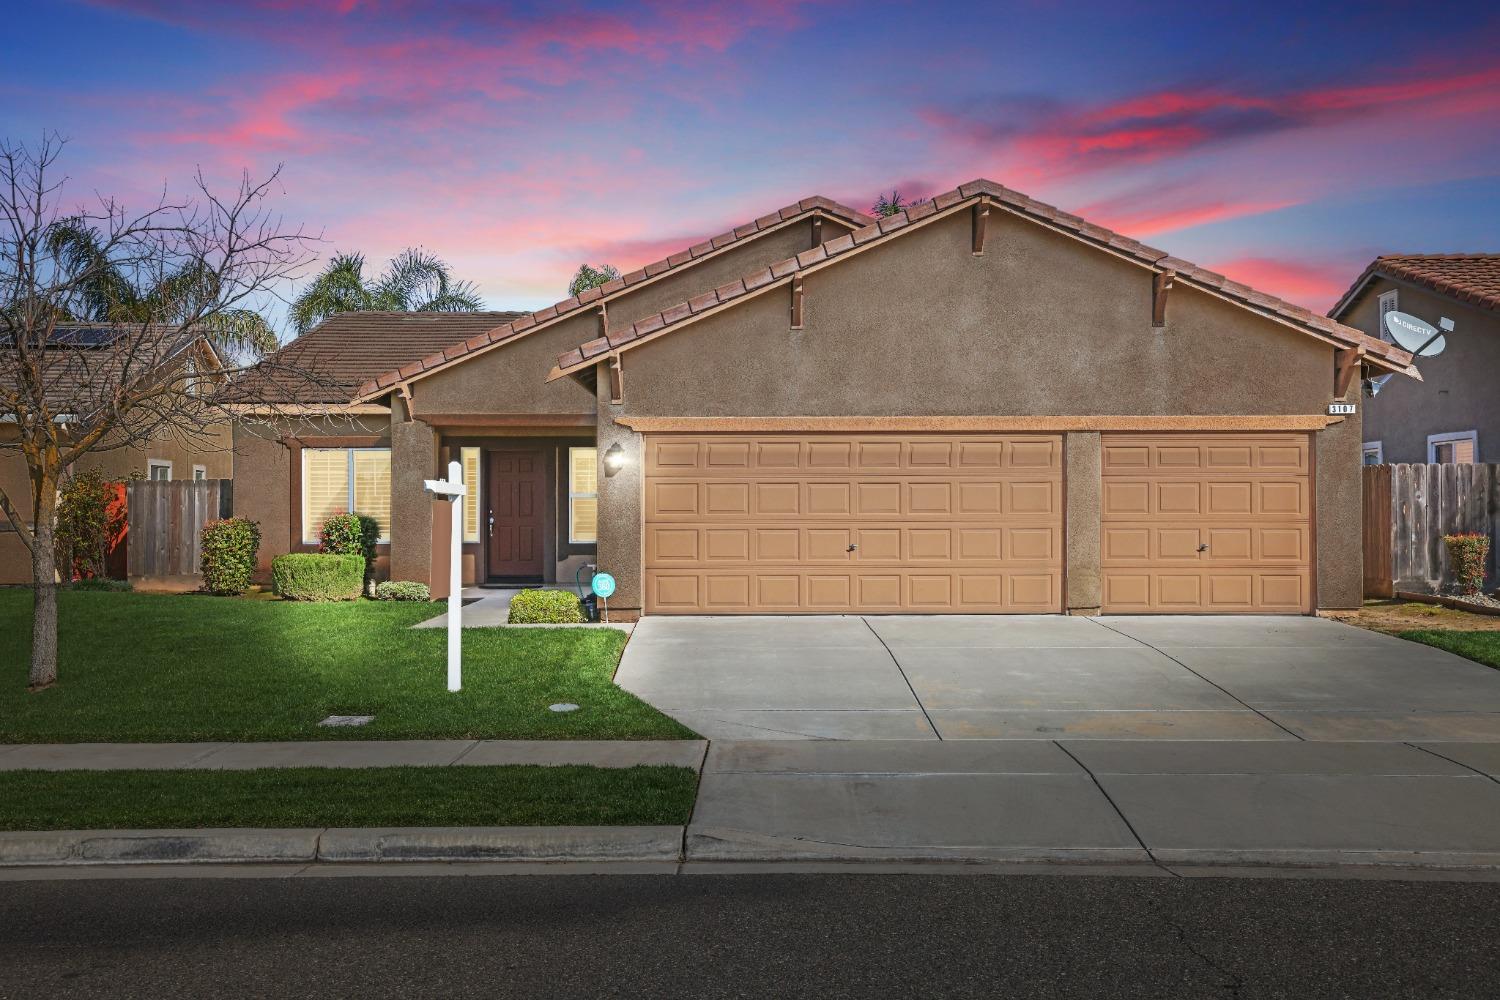 Photo of 3107 Marrs Ln in Riverbank, CA